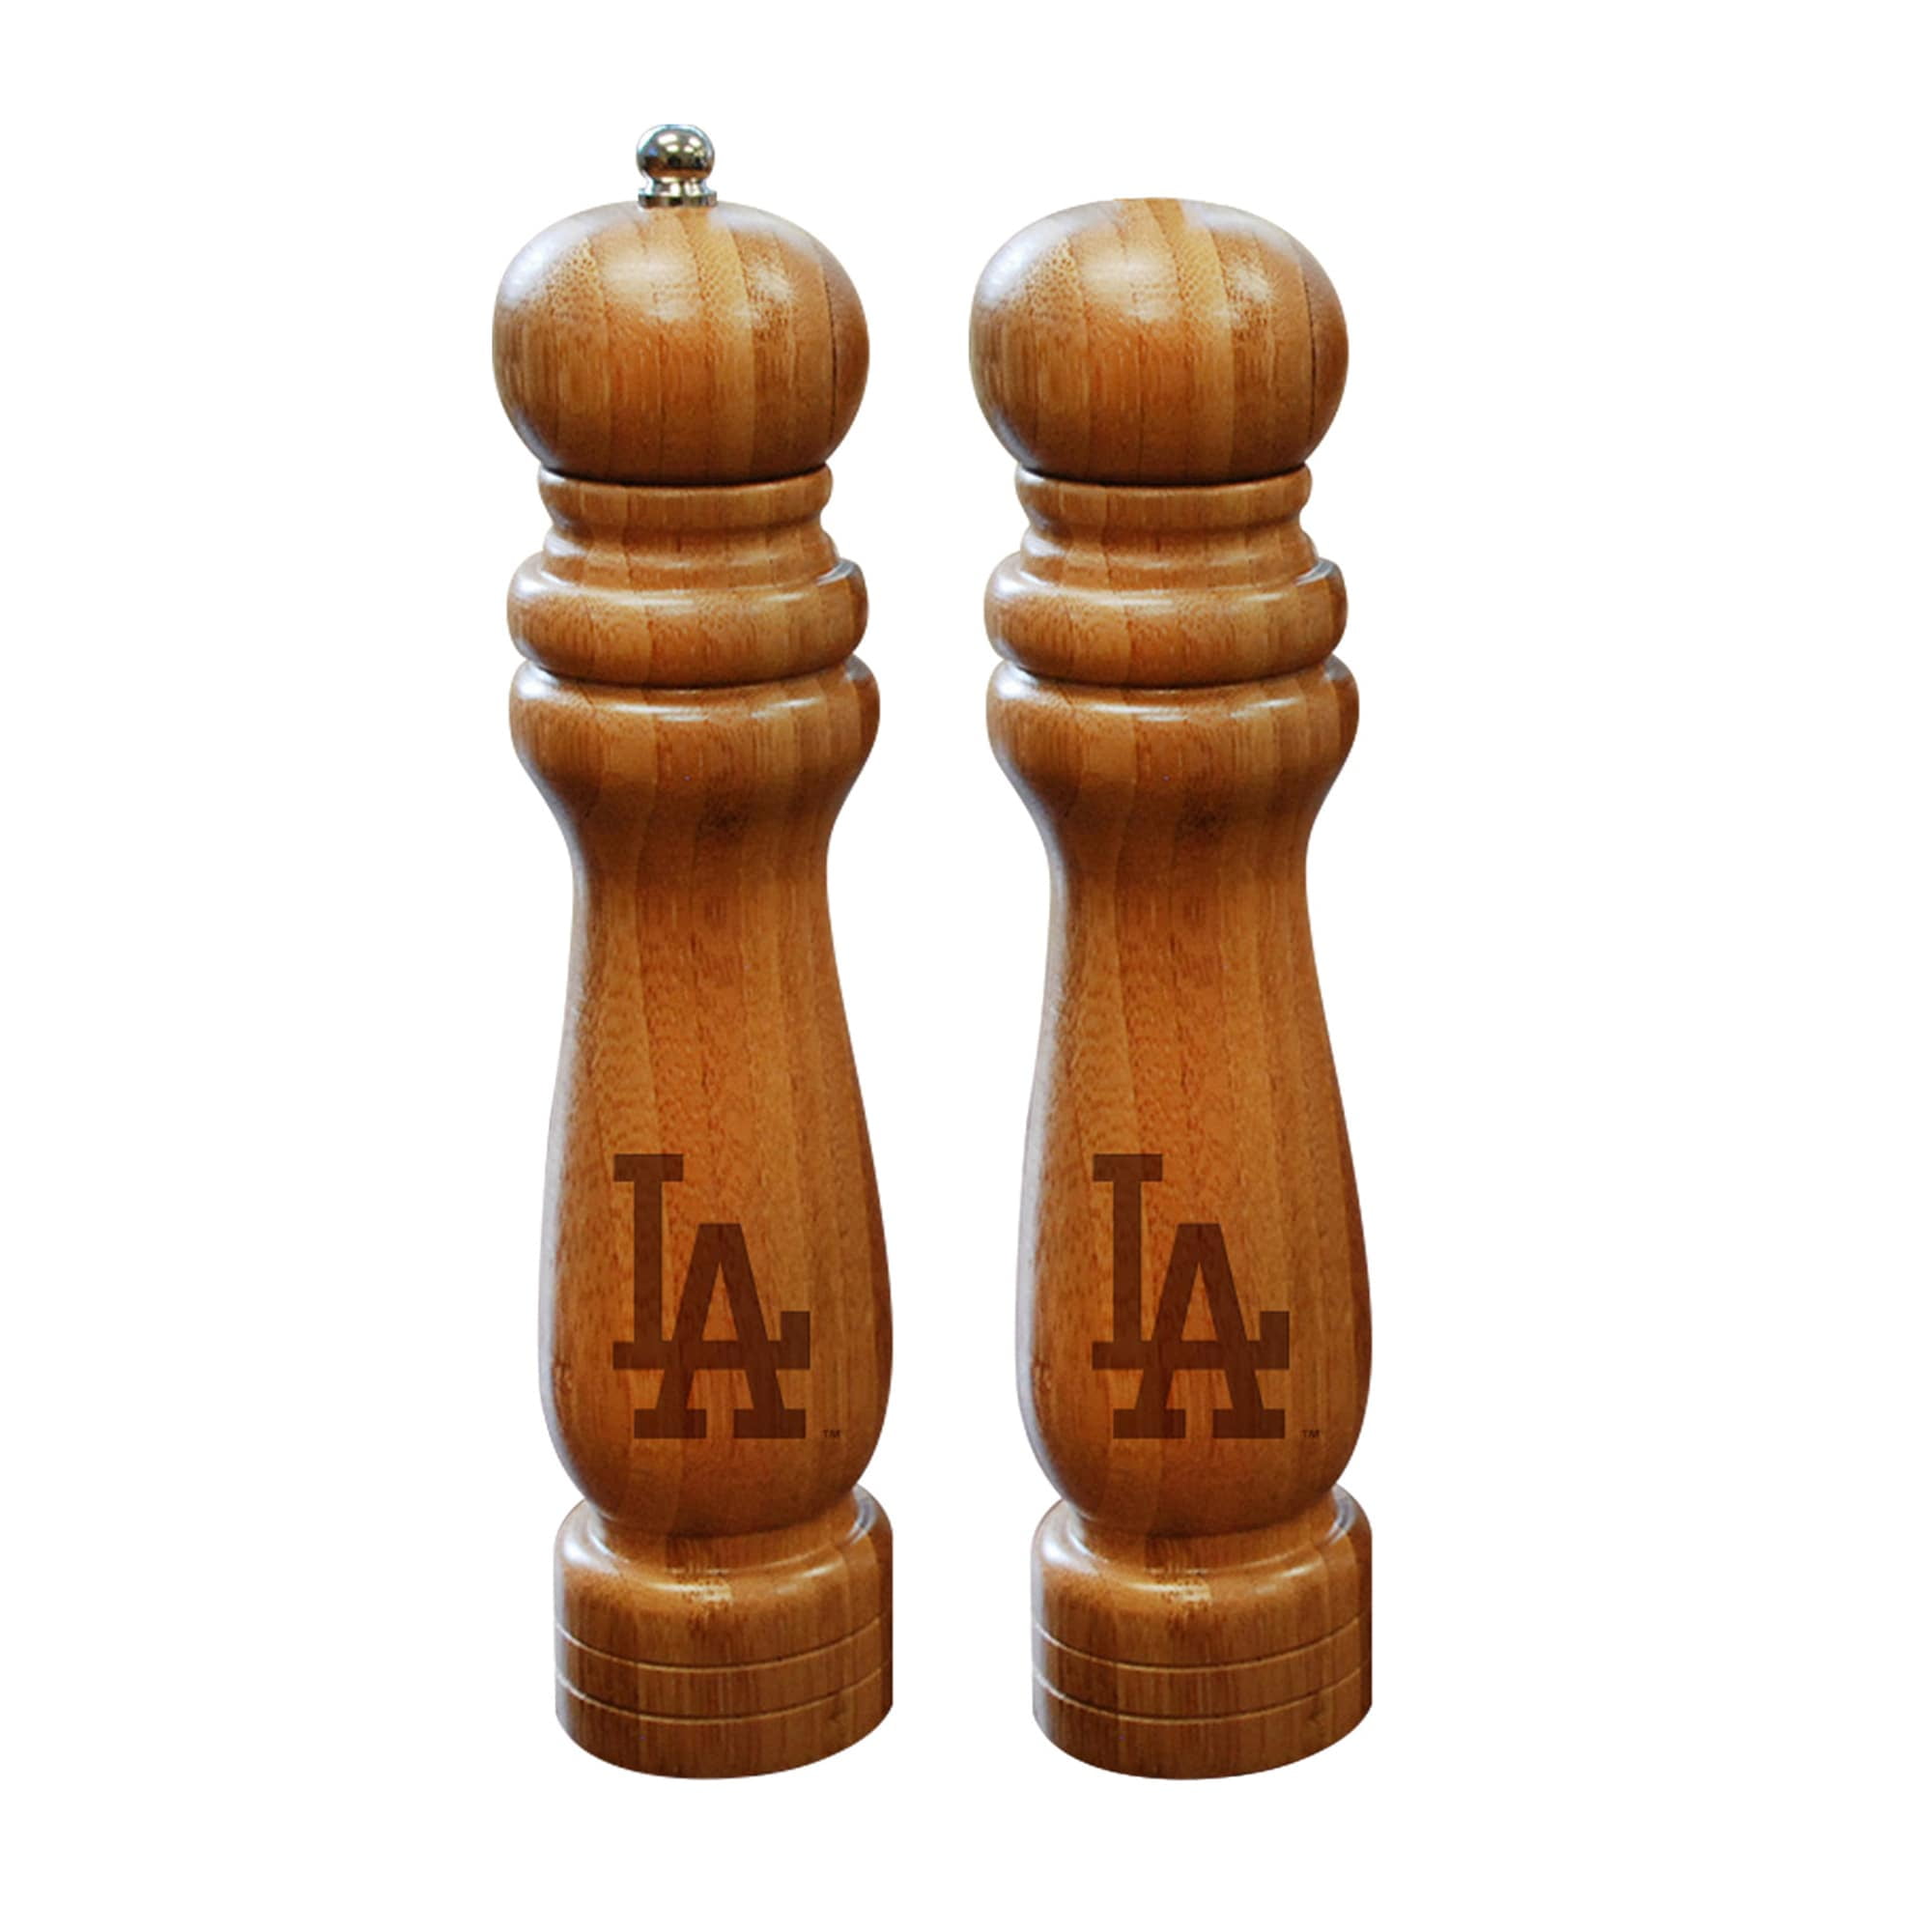 They did the pepper grinder again : r/Dodgers